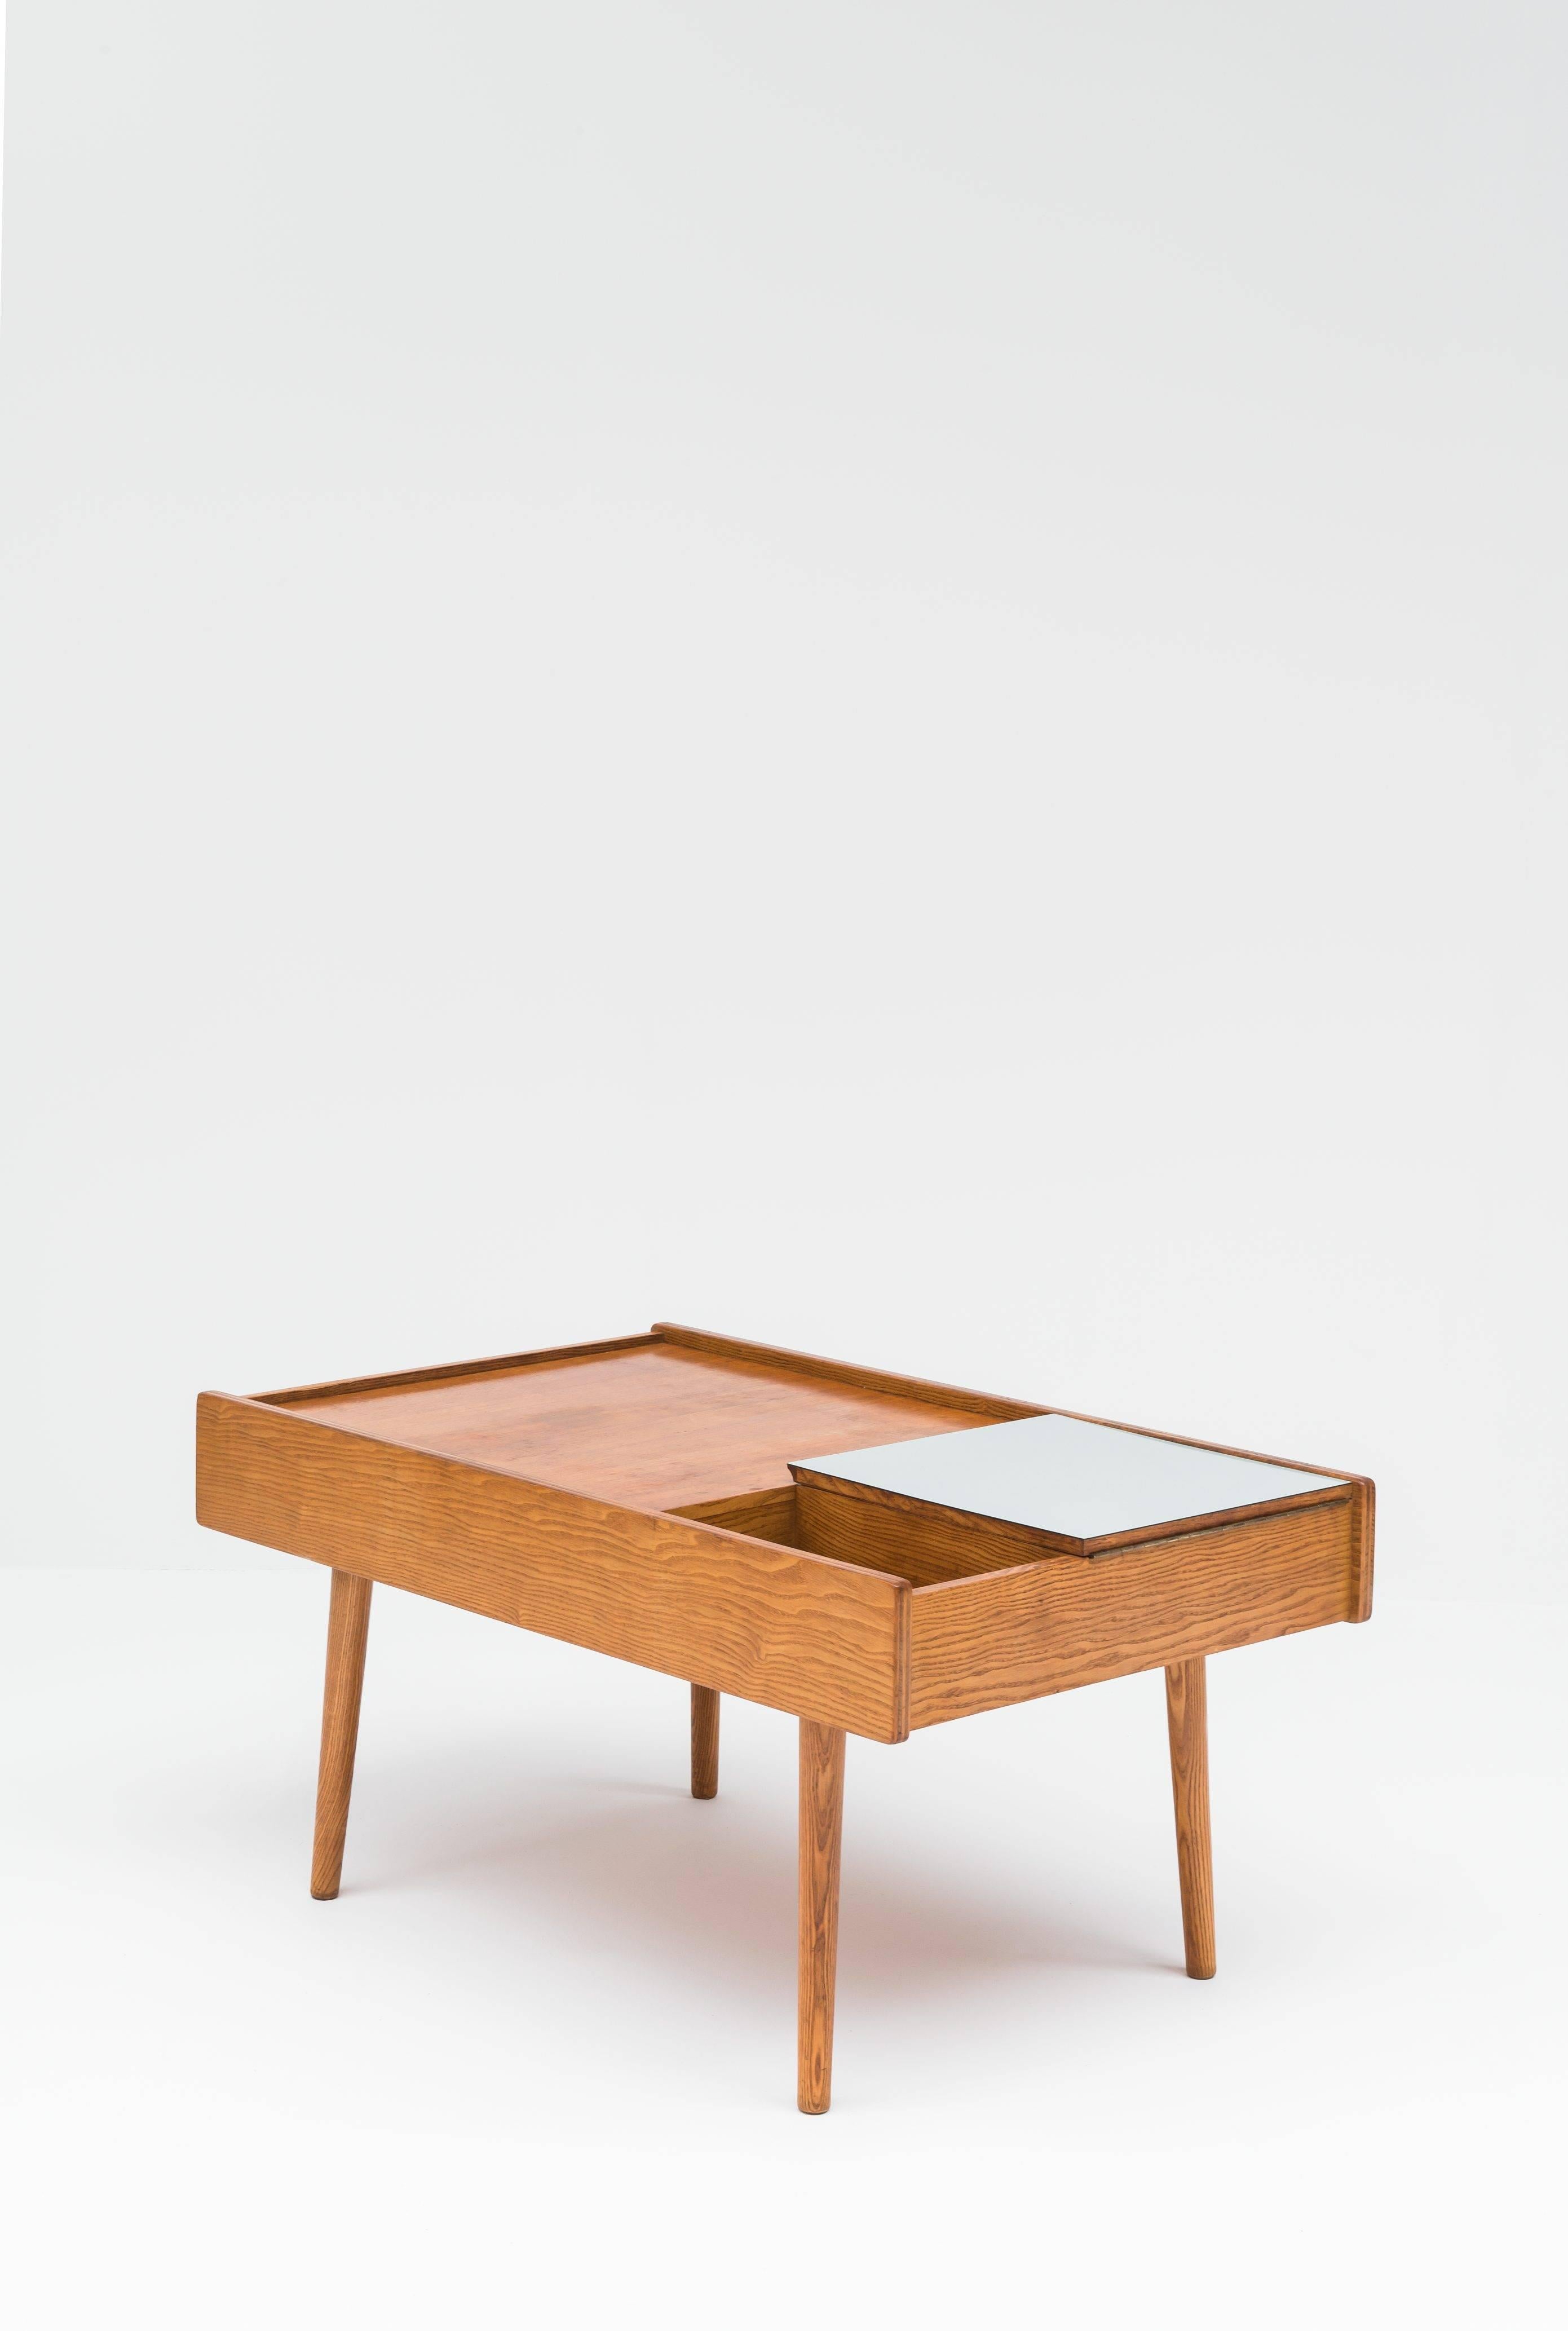 Low table 119 by Pierre Paulin (1927-2009).
Meubles TV edition, 1953.